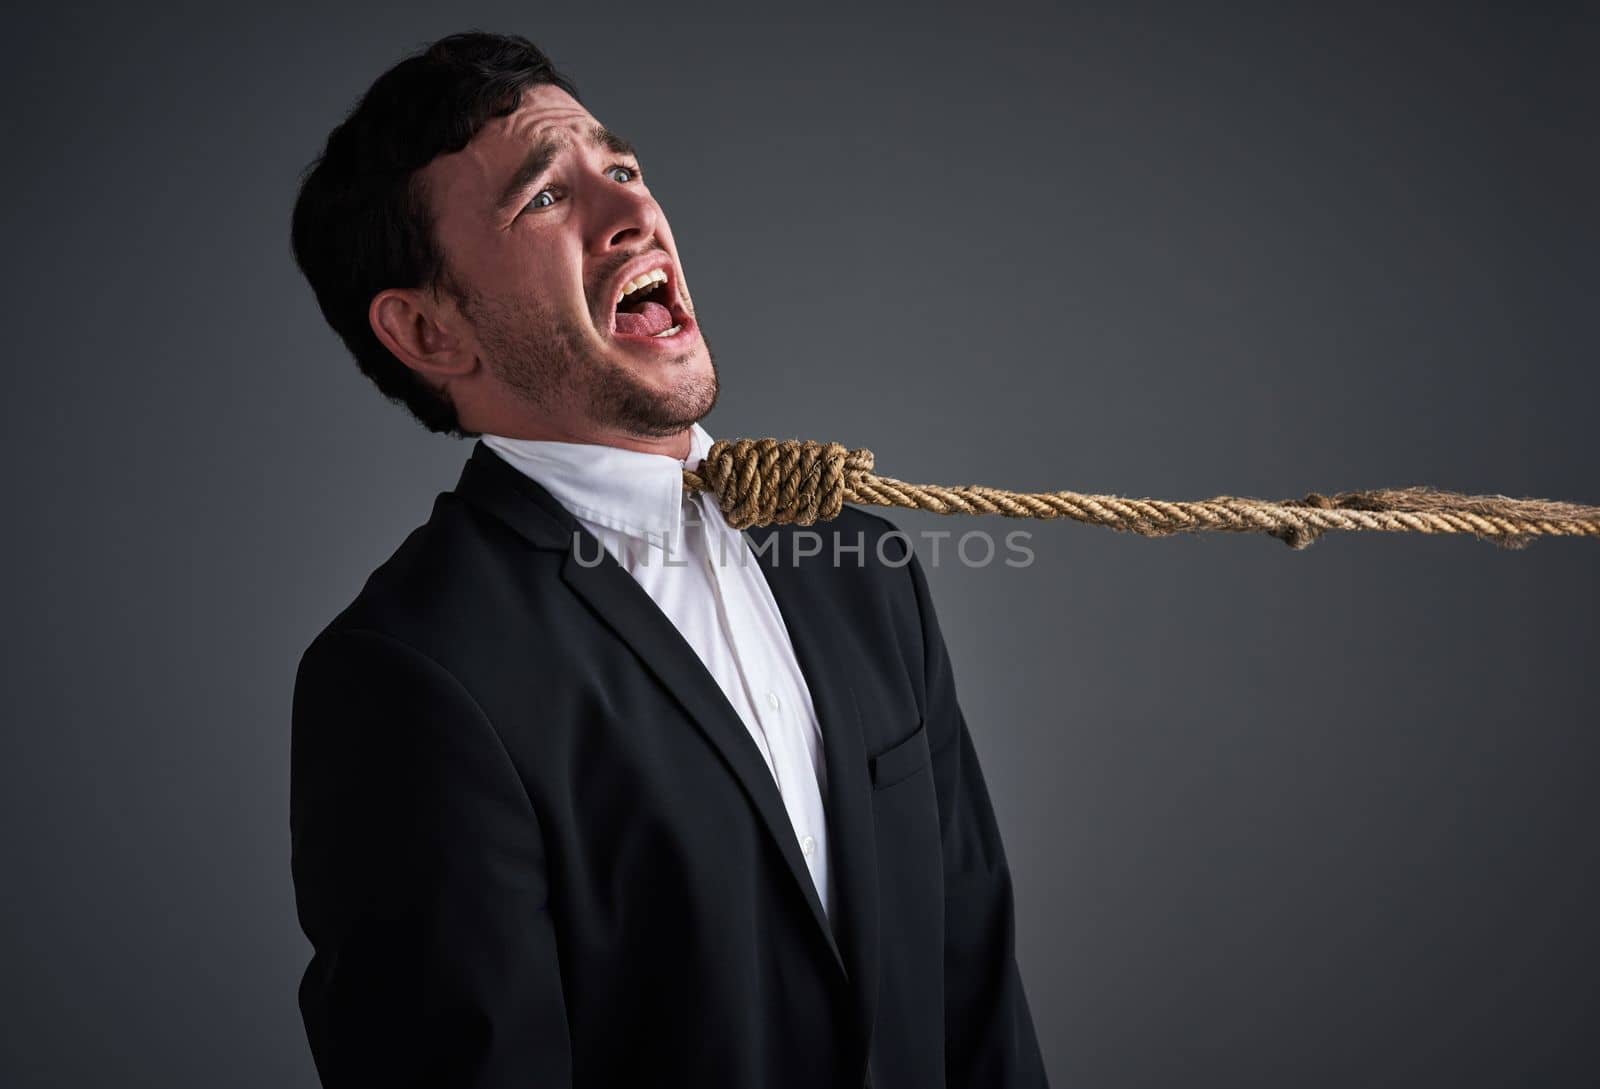 Is stress killing your career. Studio shot of a young businessman being pulled by a hangmans noose against a gray background